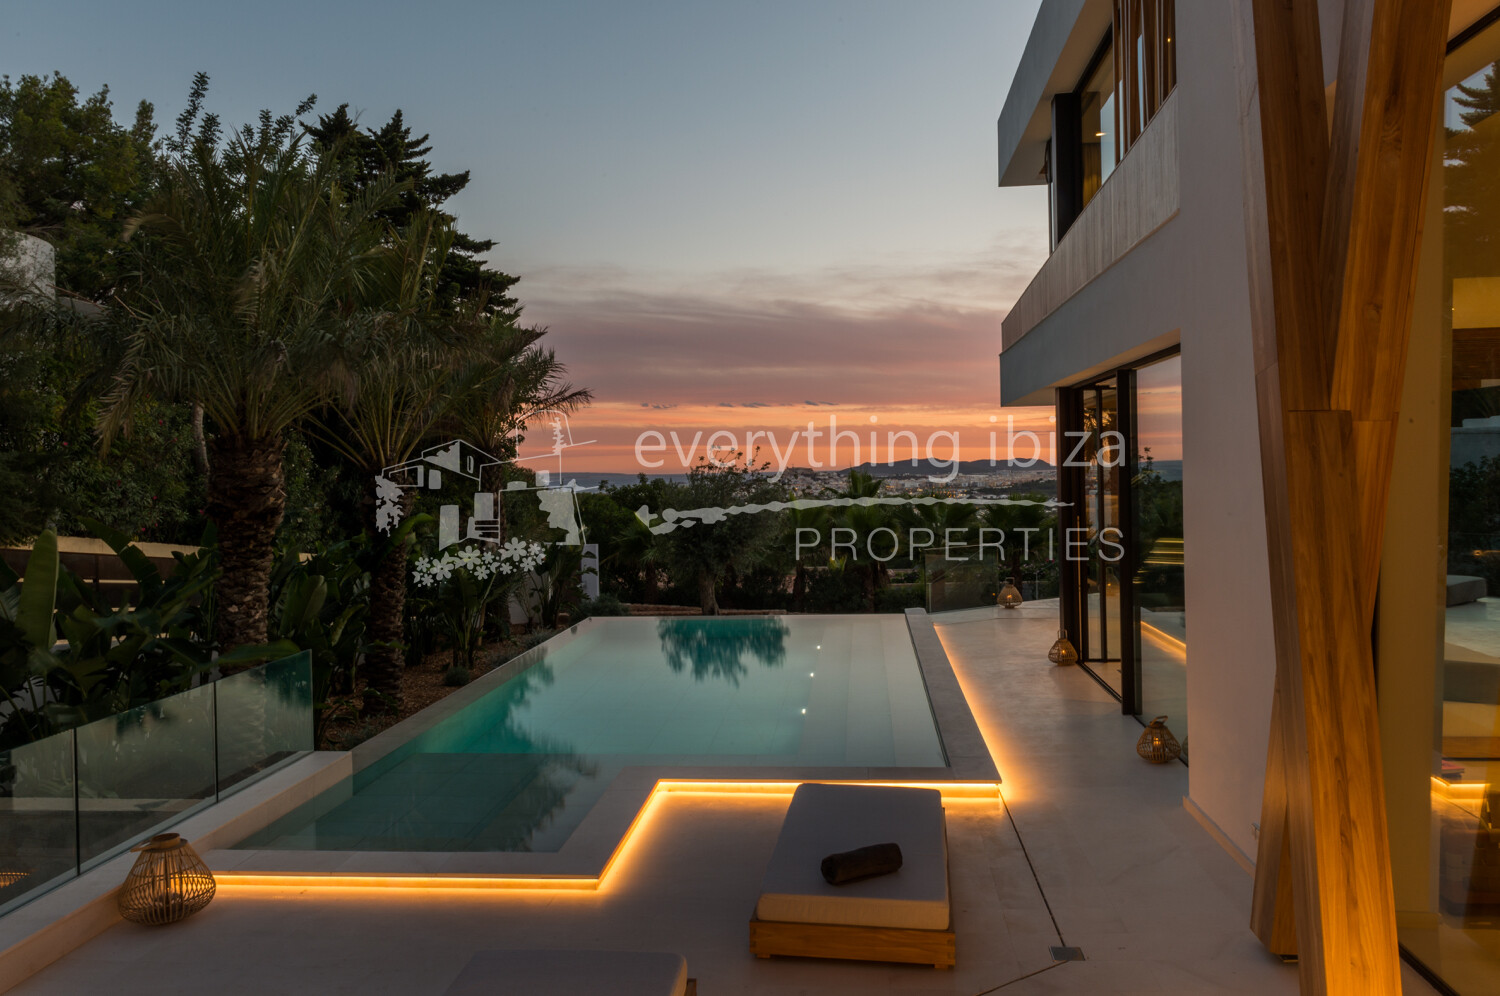 Beautiful Contemporary Villa with Elevated Views Over The Sea D'Alt Vila and Formentera, ref. 1673, for sale in Ibiza by everything ibiza Properties